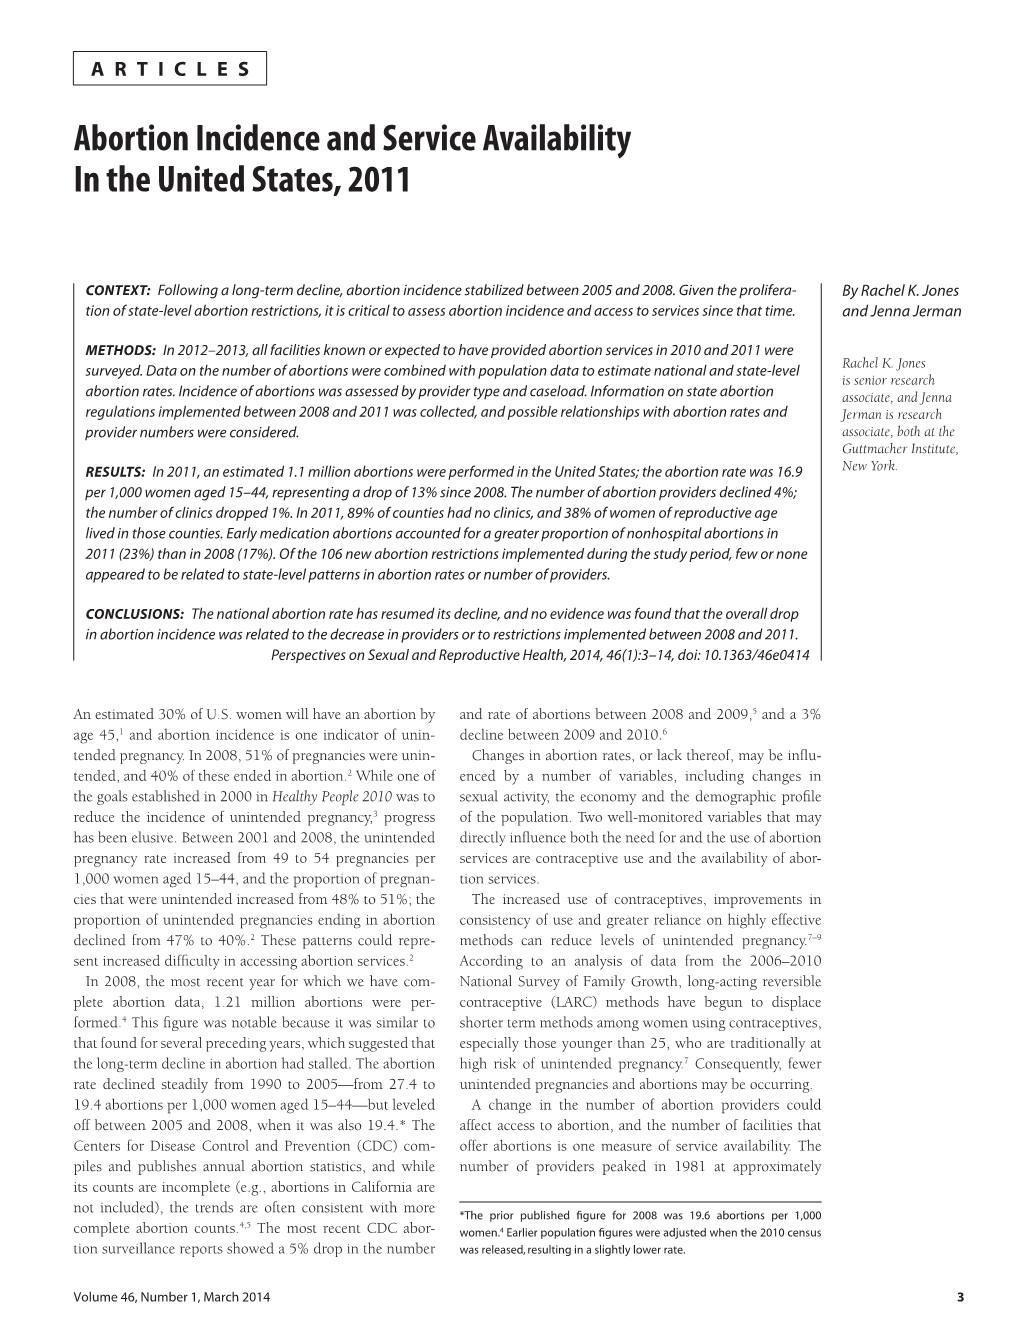 Abortion Incidence and Service Availability in the United States, 2011